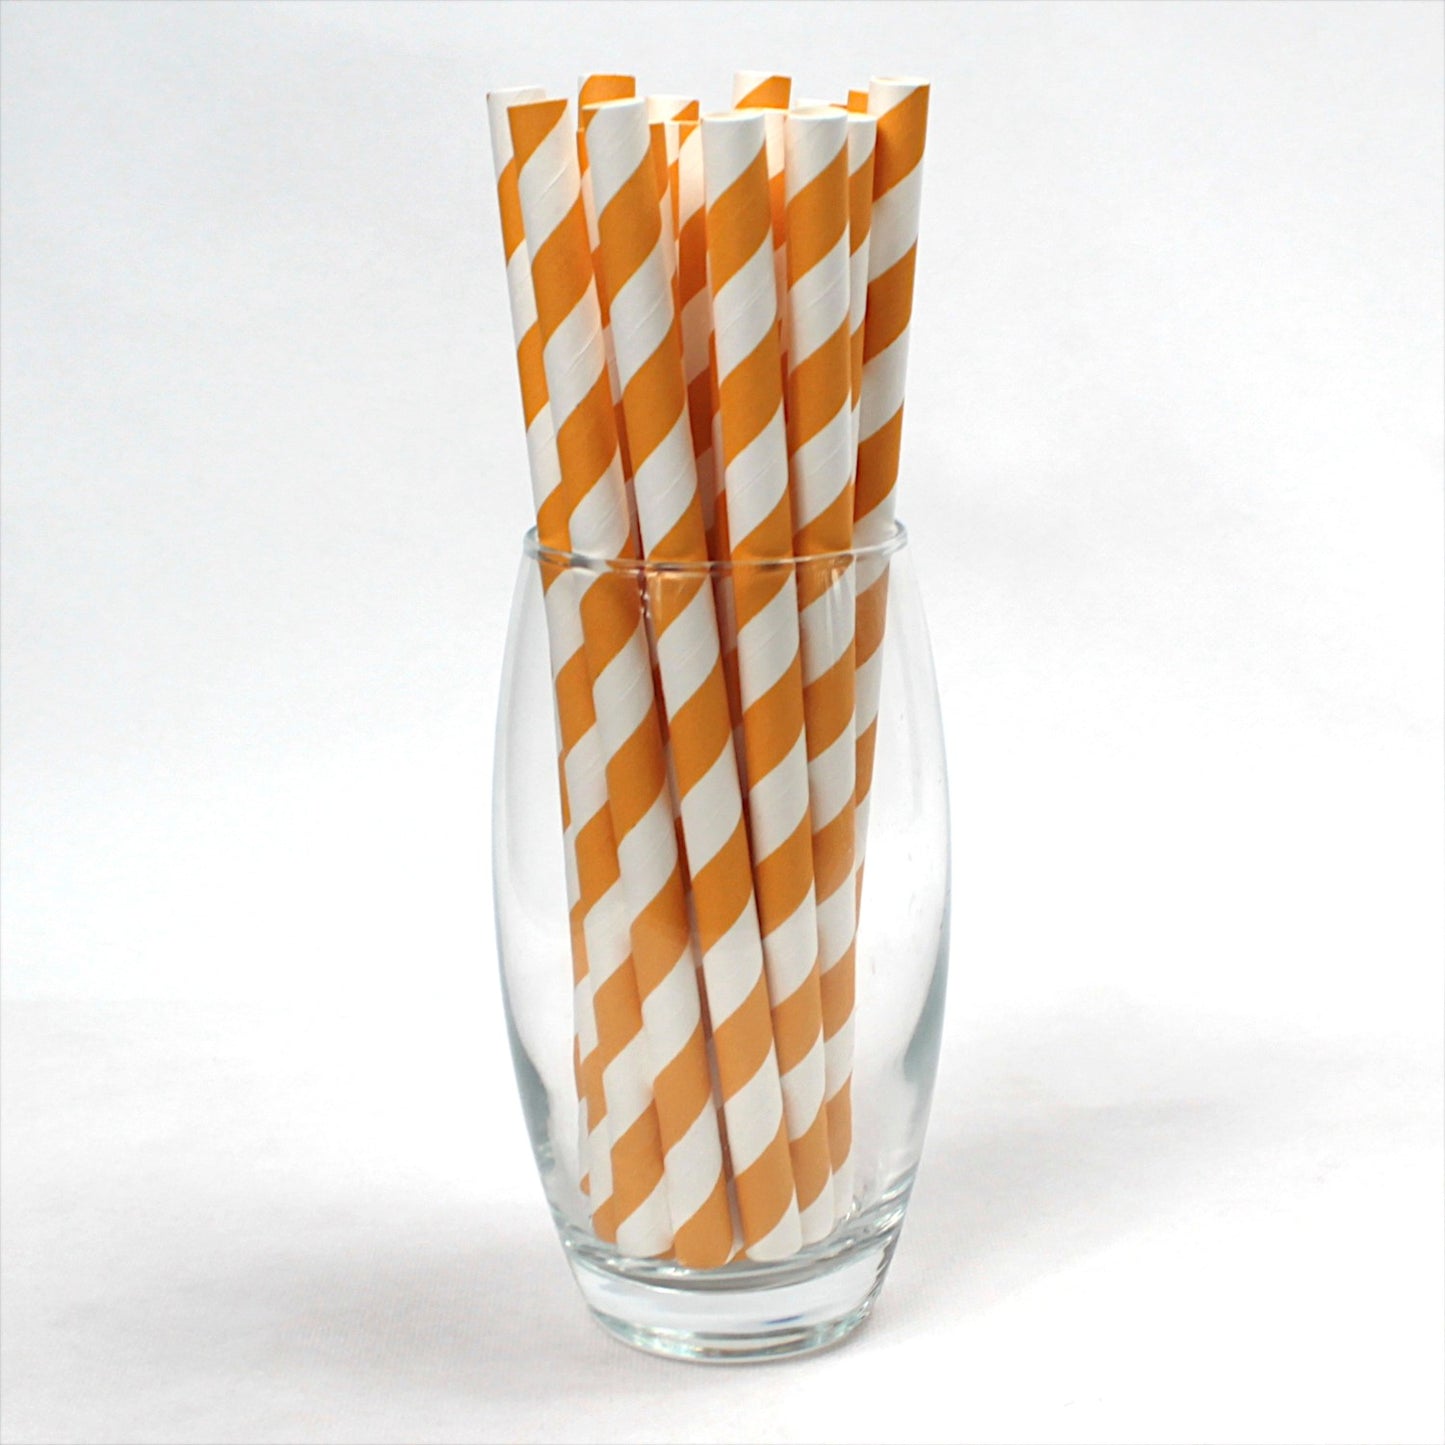 Yellow & White Striped Paper Straws (10mm x 200mm) - Quality Drinking Straws for Smoothies and Milkshakes - Intrinsic Paper Straws